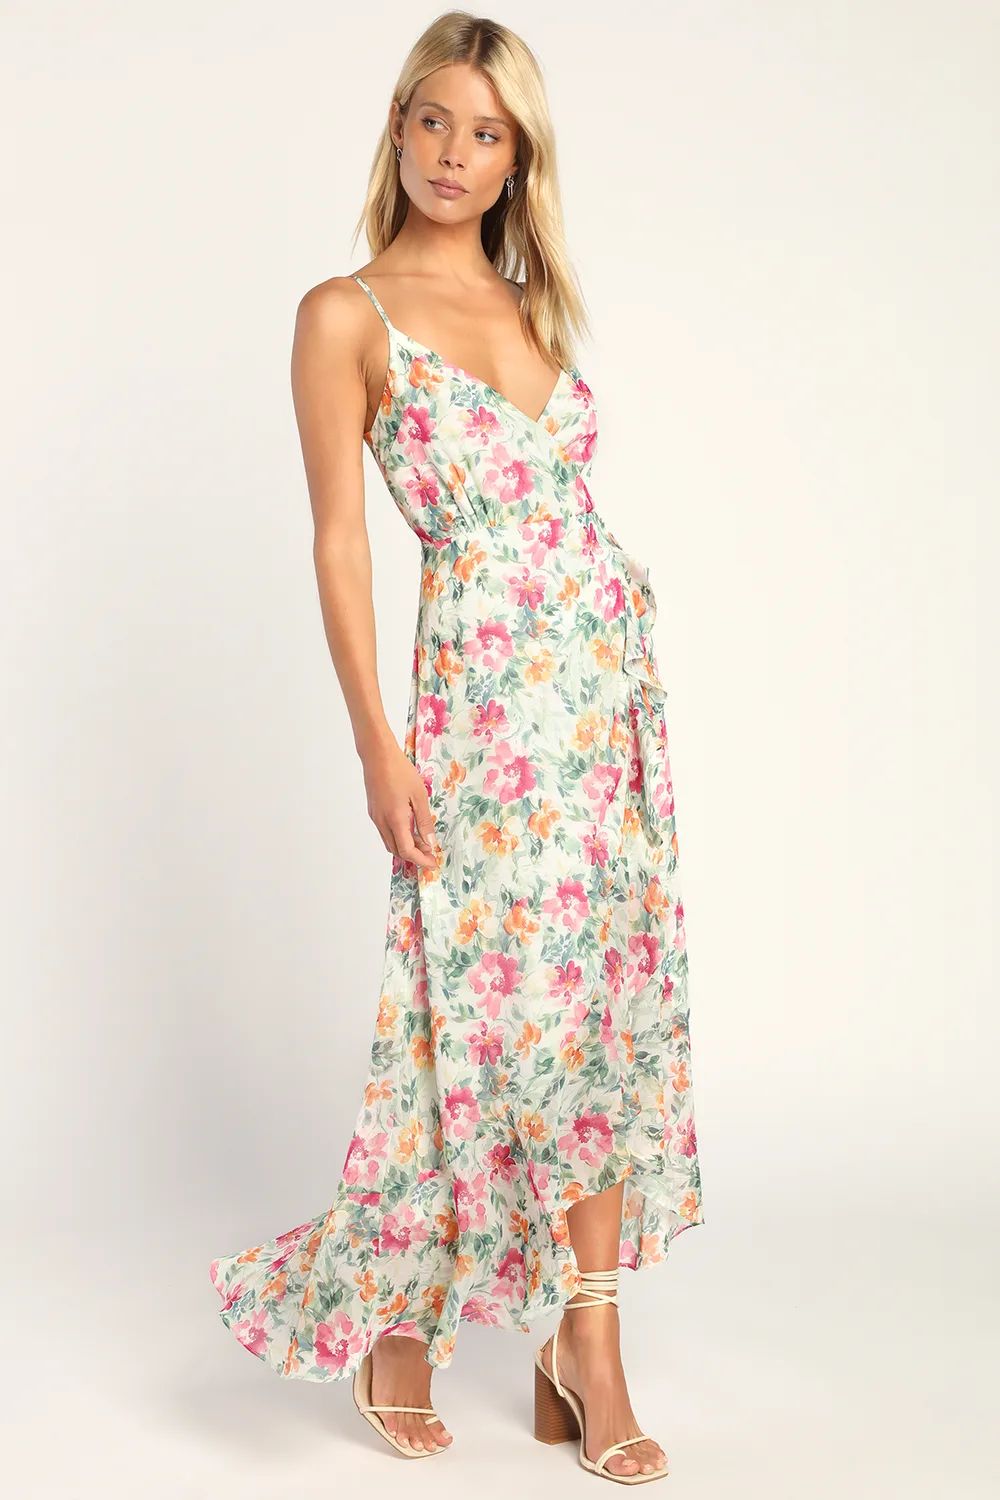 Fly Me to Florence White Floral Print Ruffled High-Low Dress | Lulus (US)